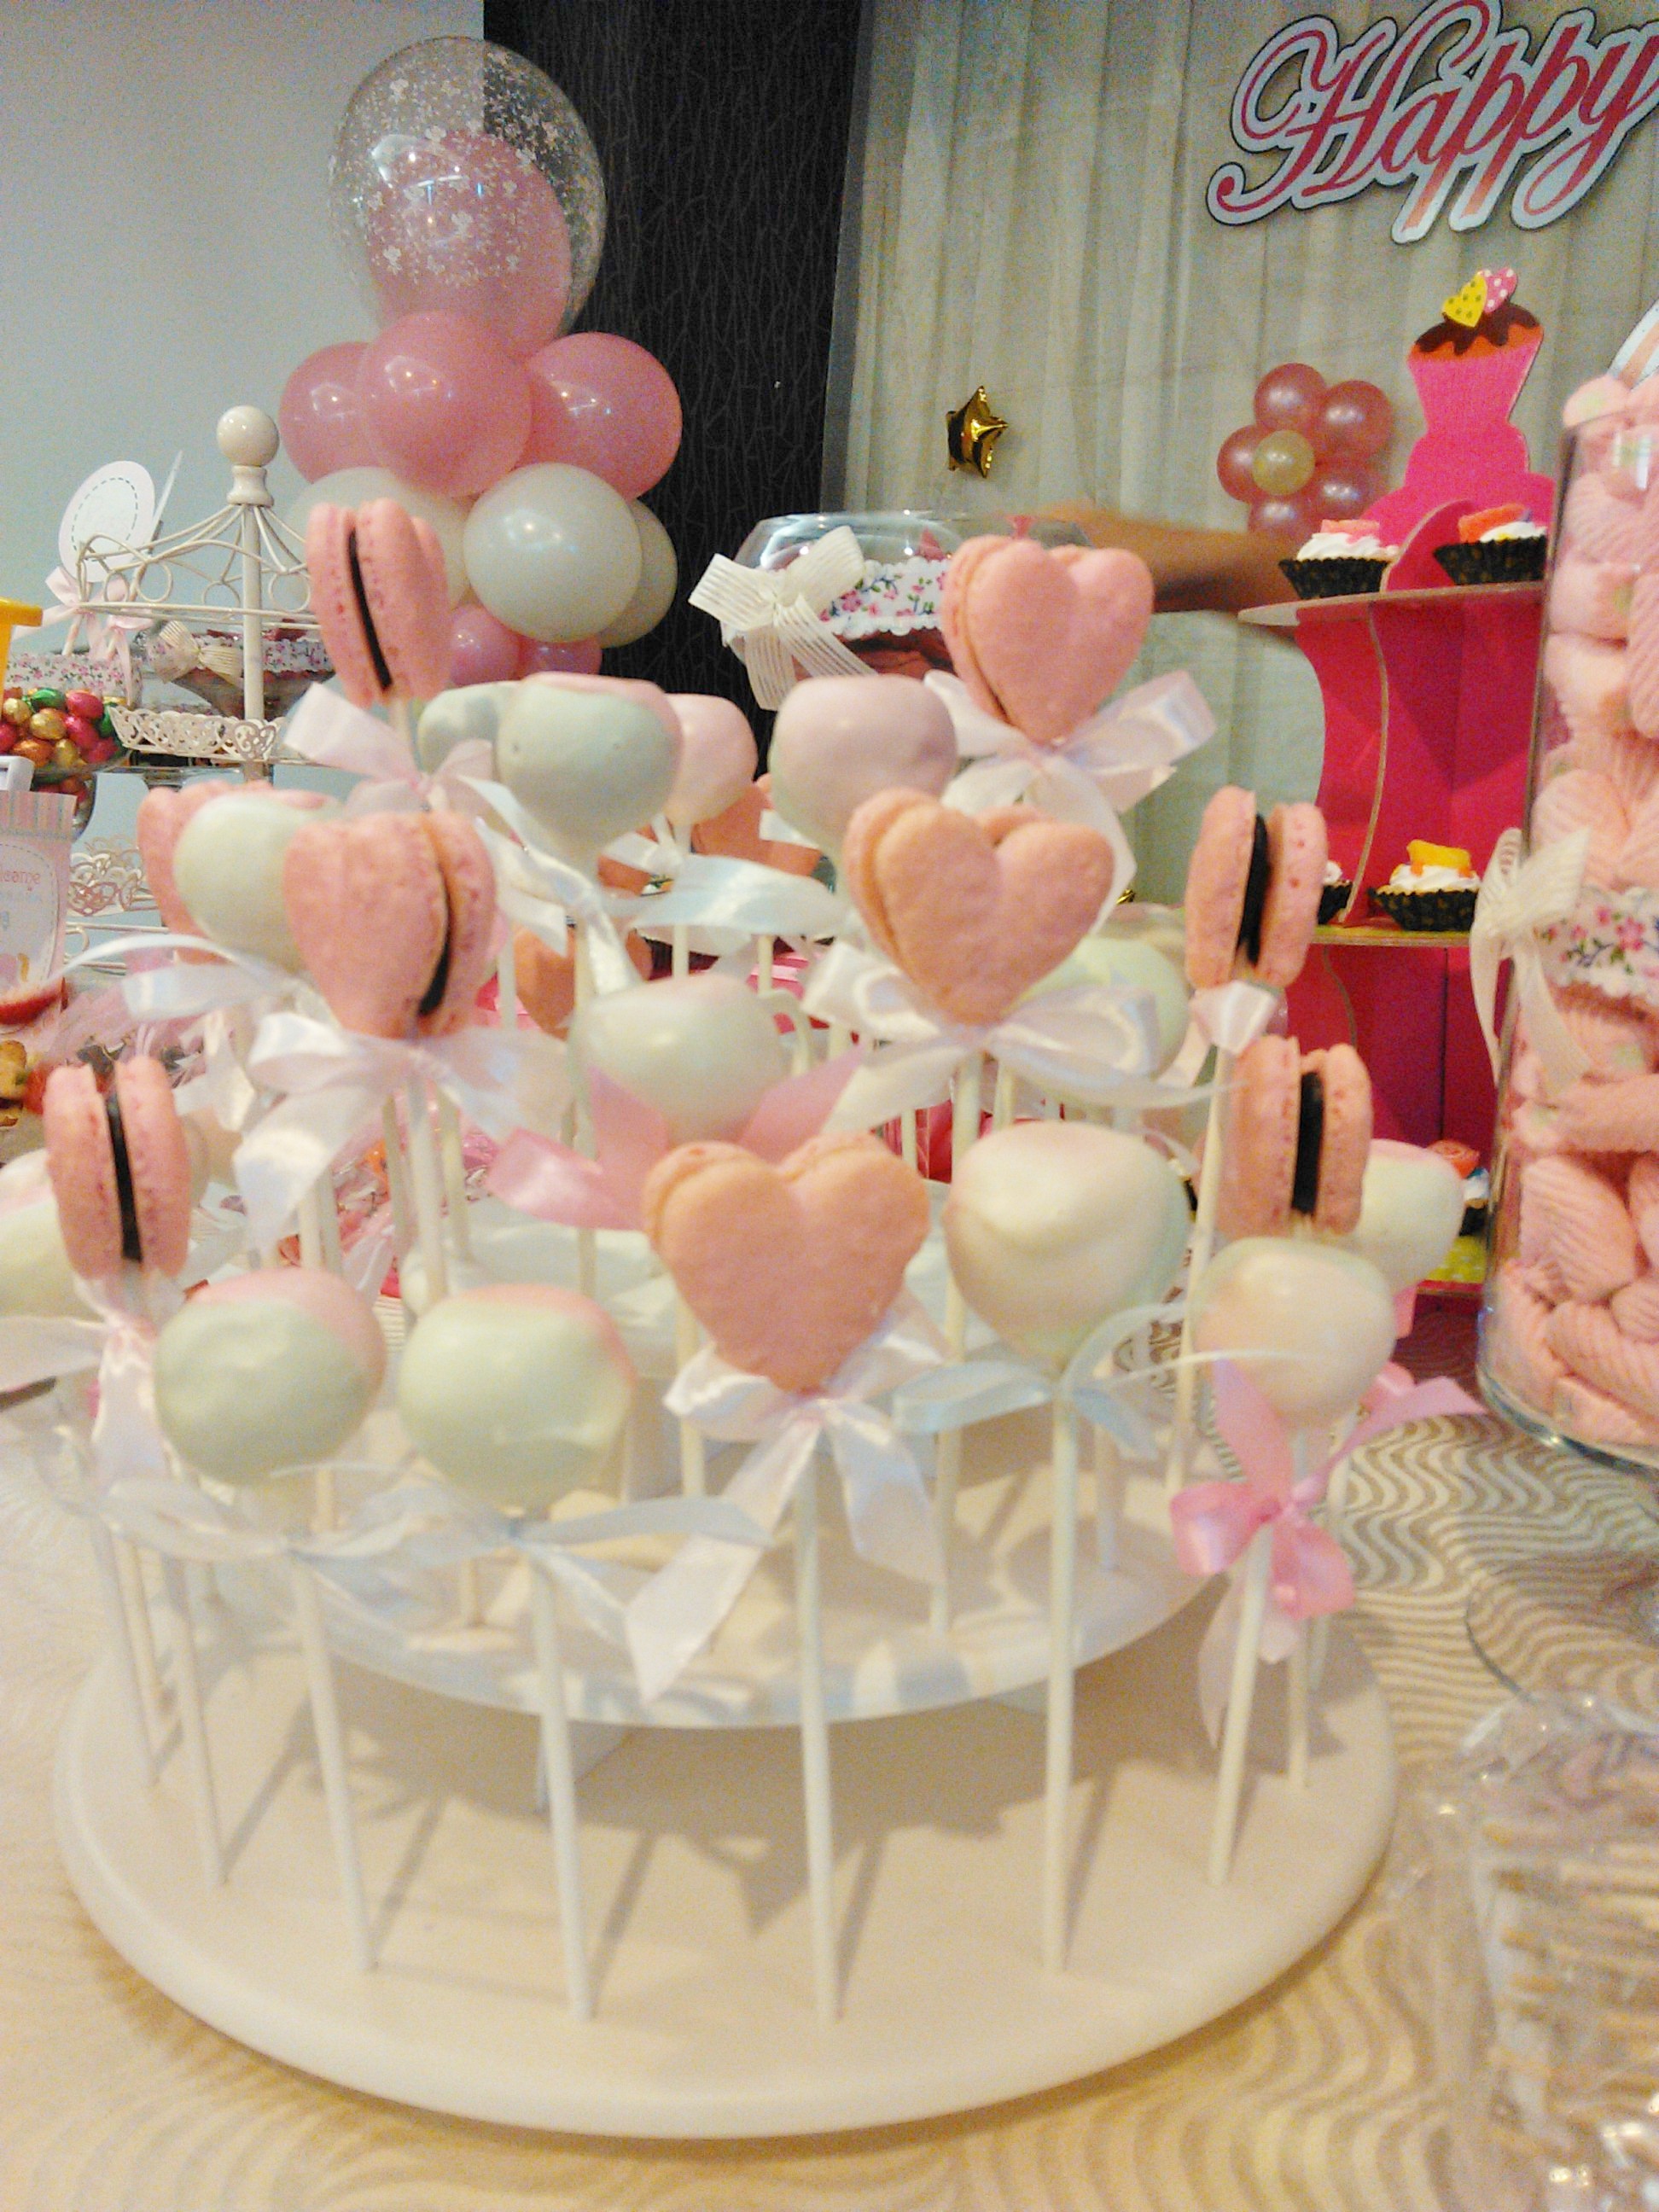 Heart shaped macaron pops and cake pops